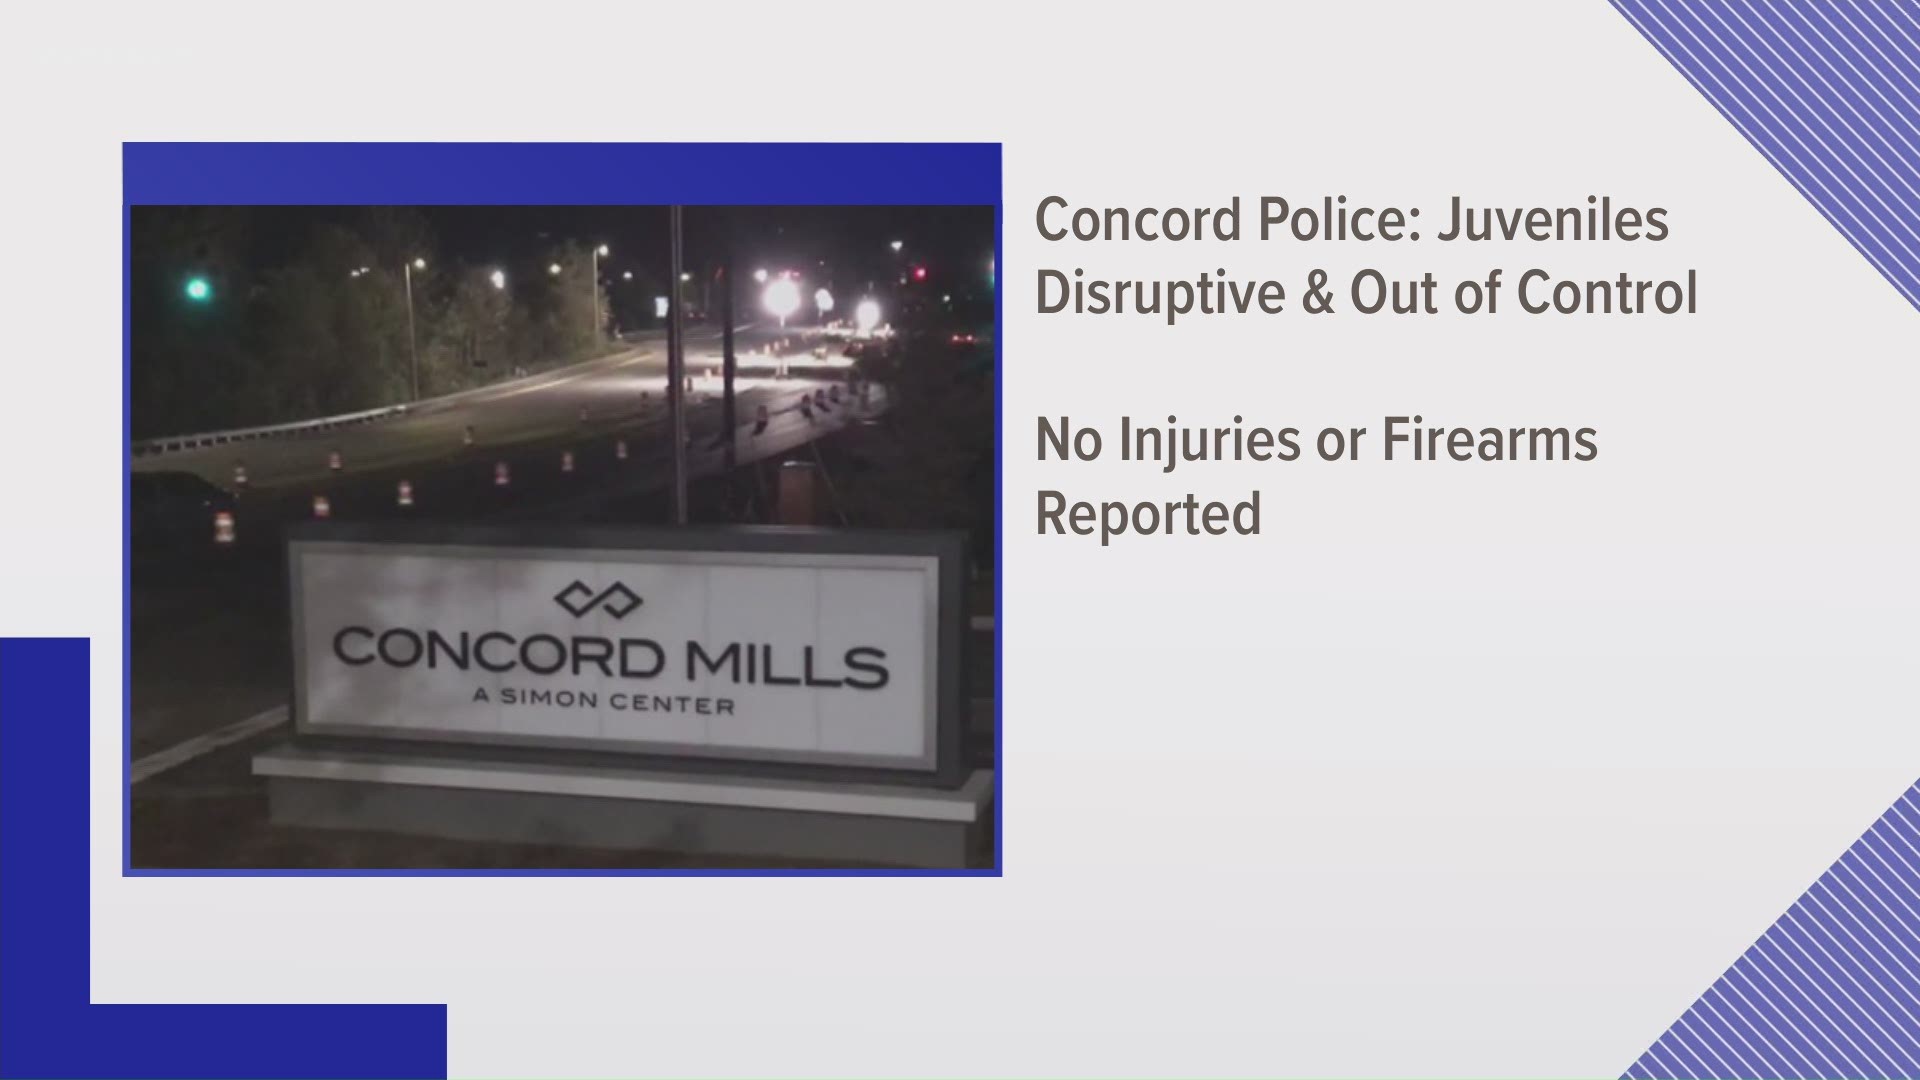 Concord Police said there were no reports of injuries or firearms.